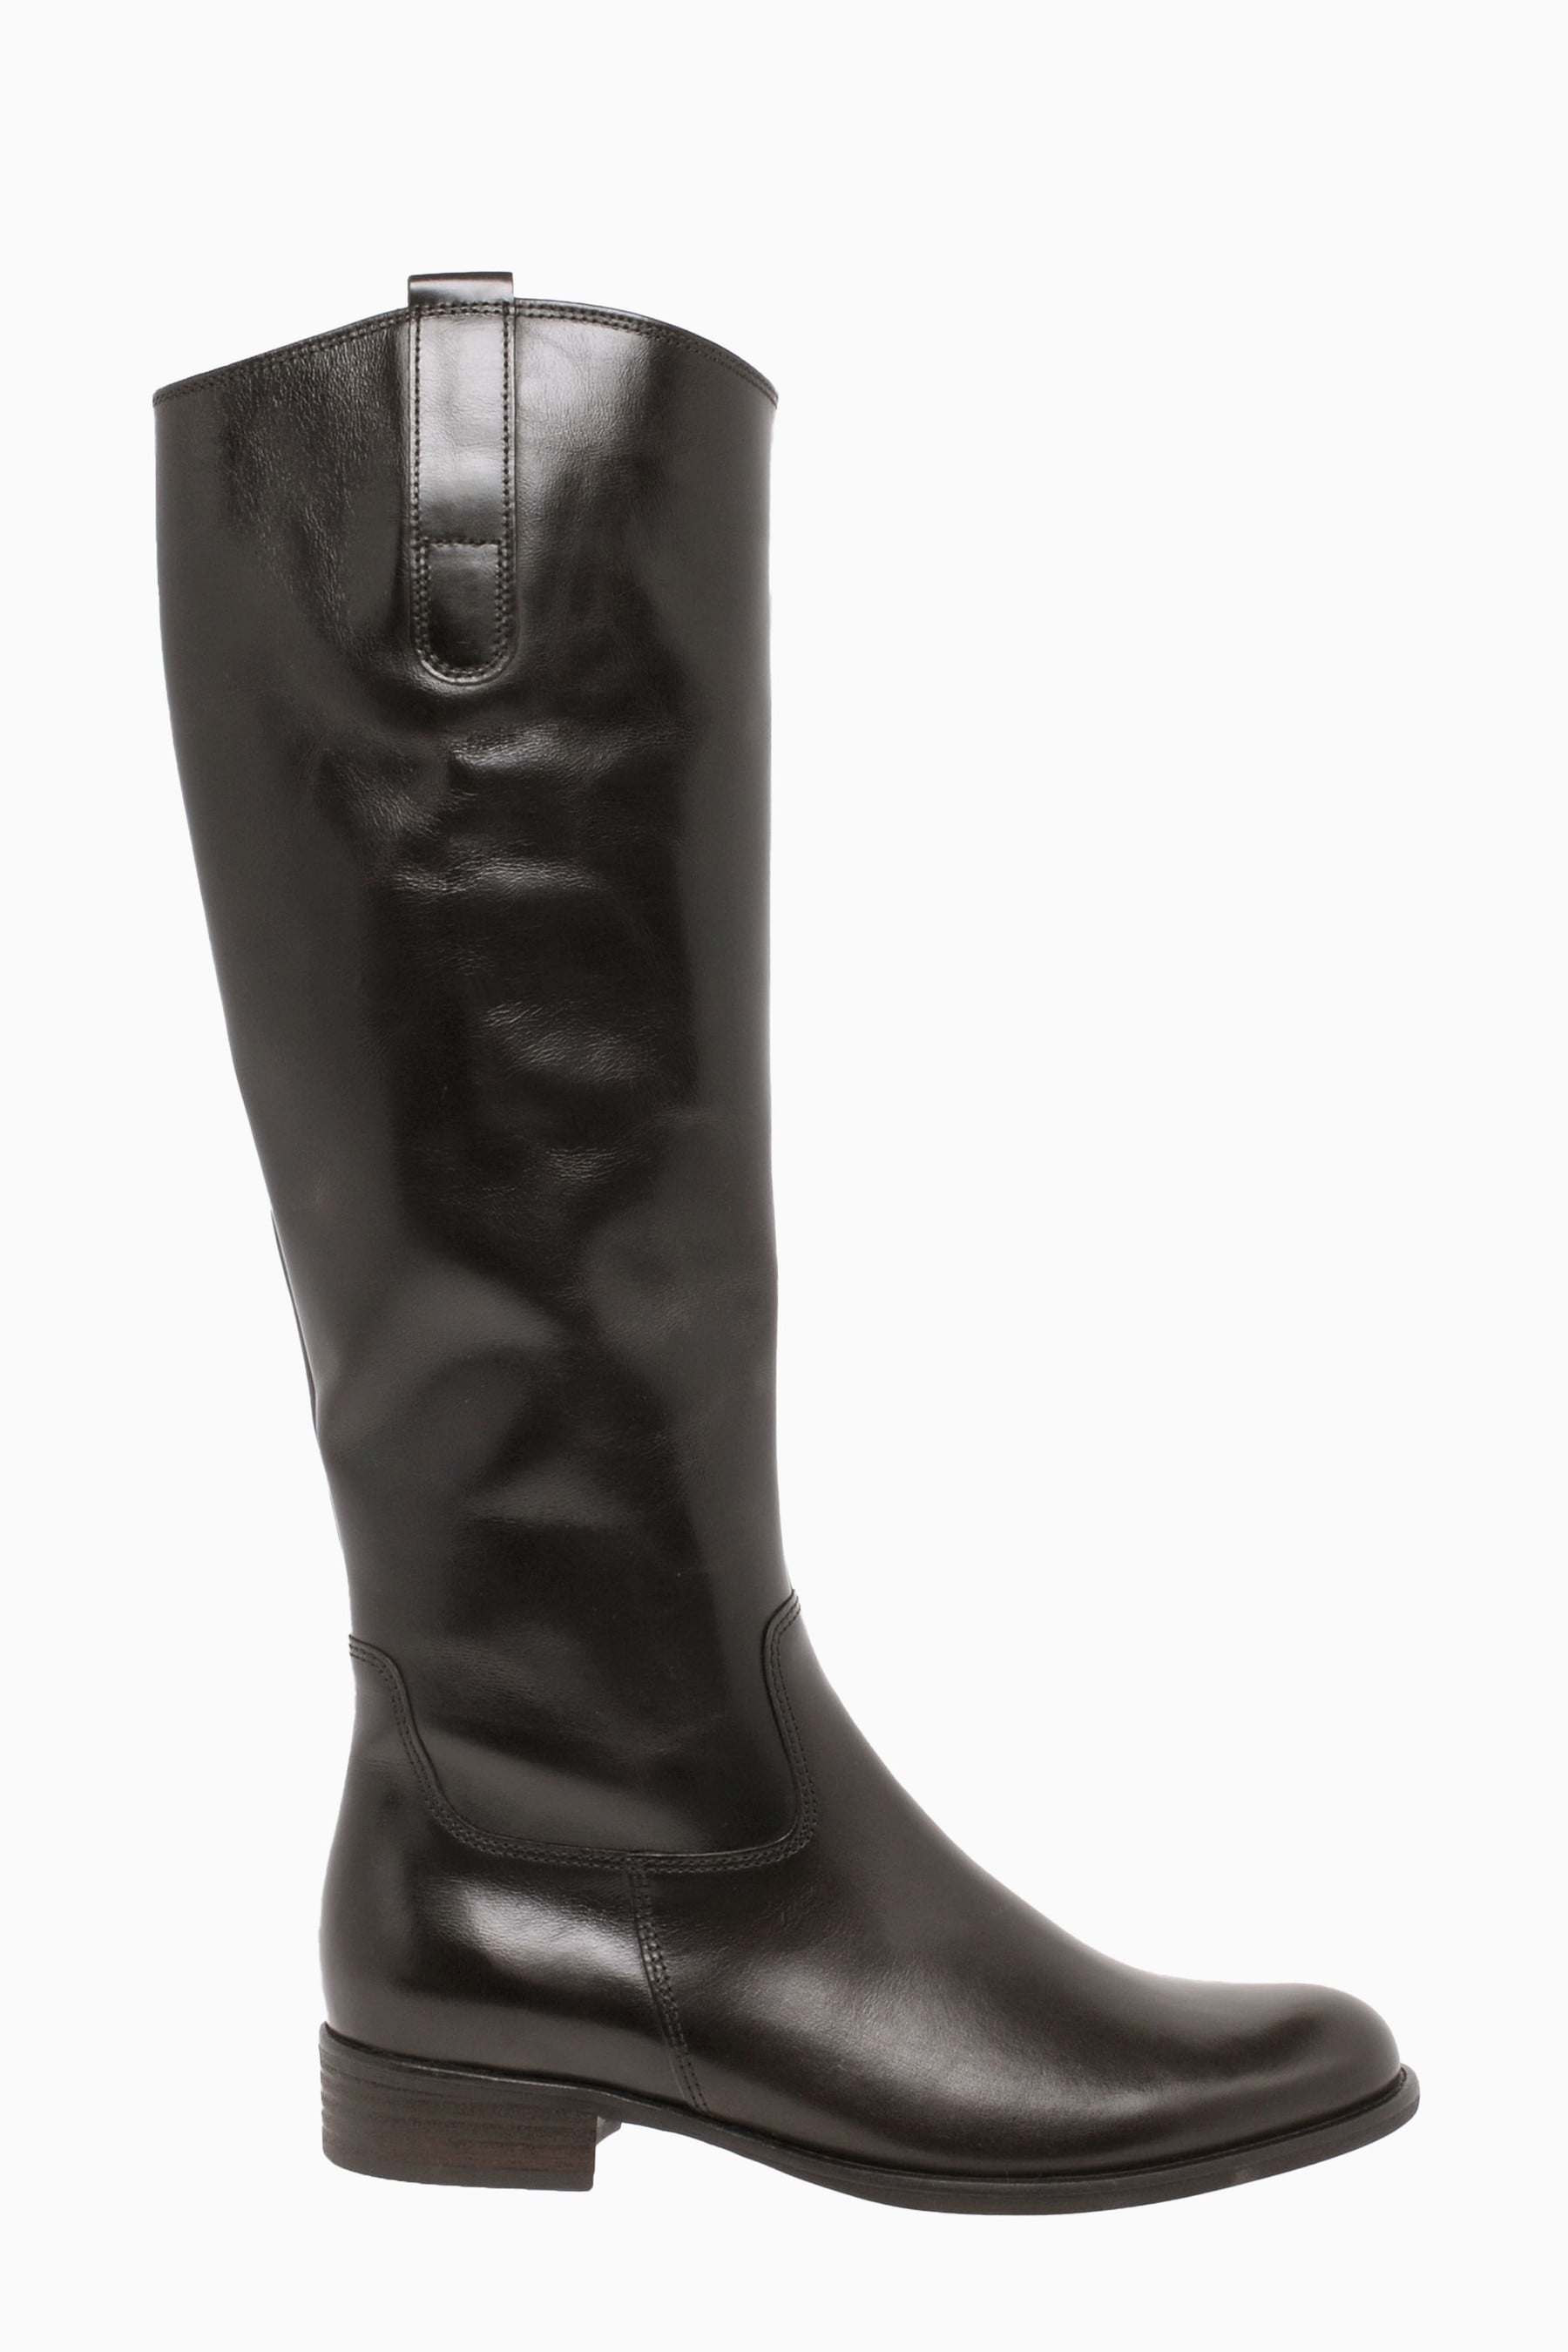 Buy Gabor Brook Espresso Leather Knee Length Fashion Boots from the ...